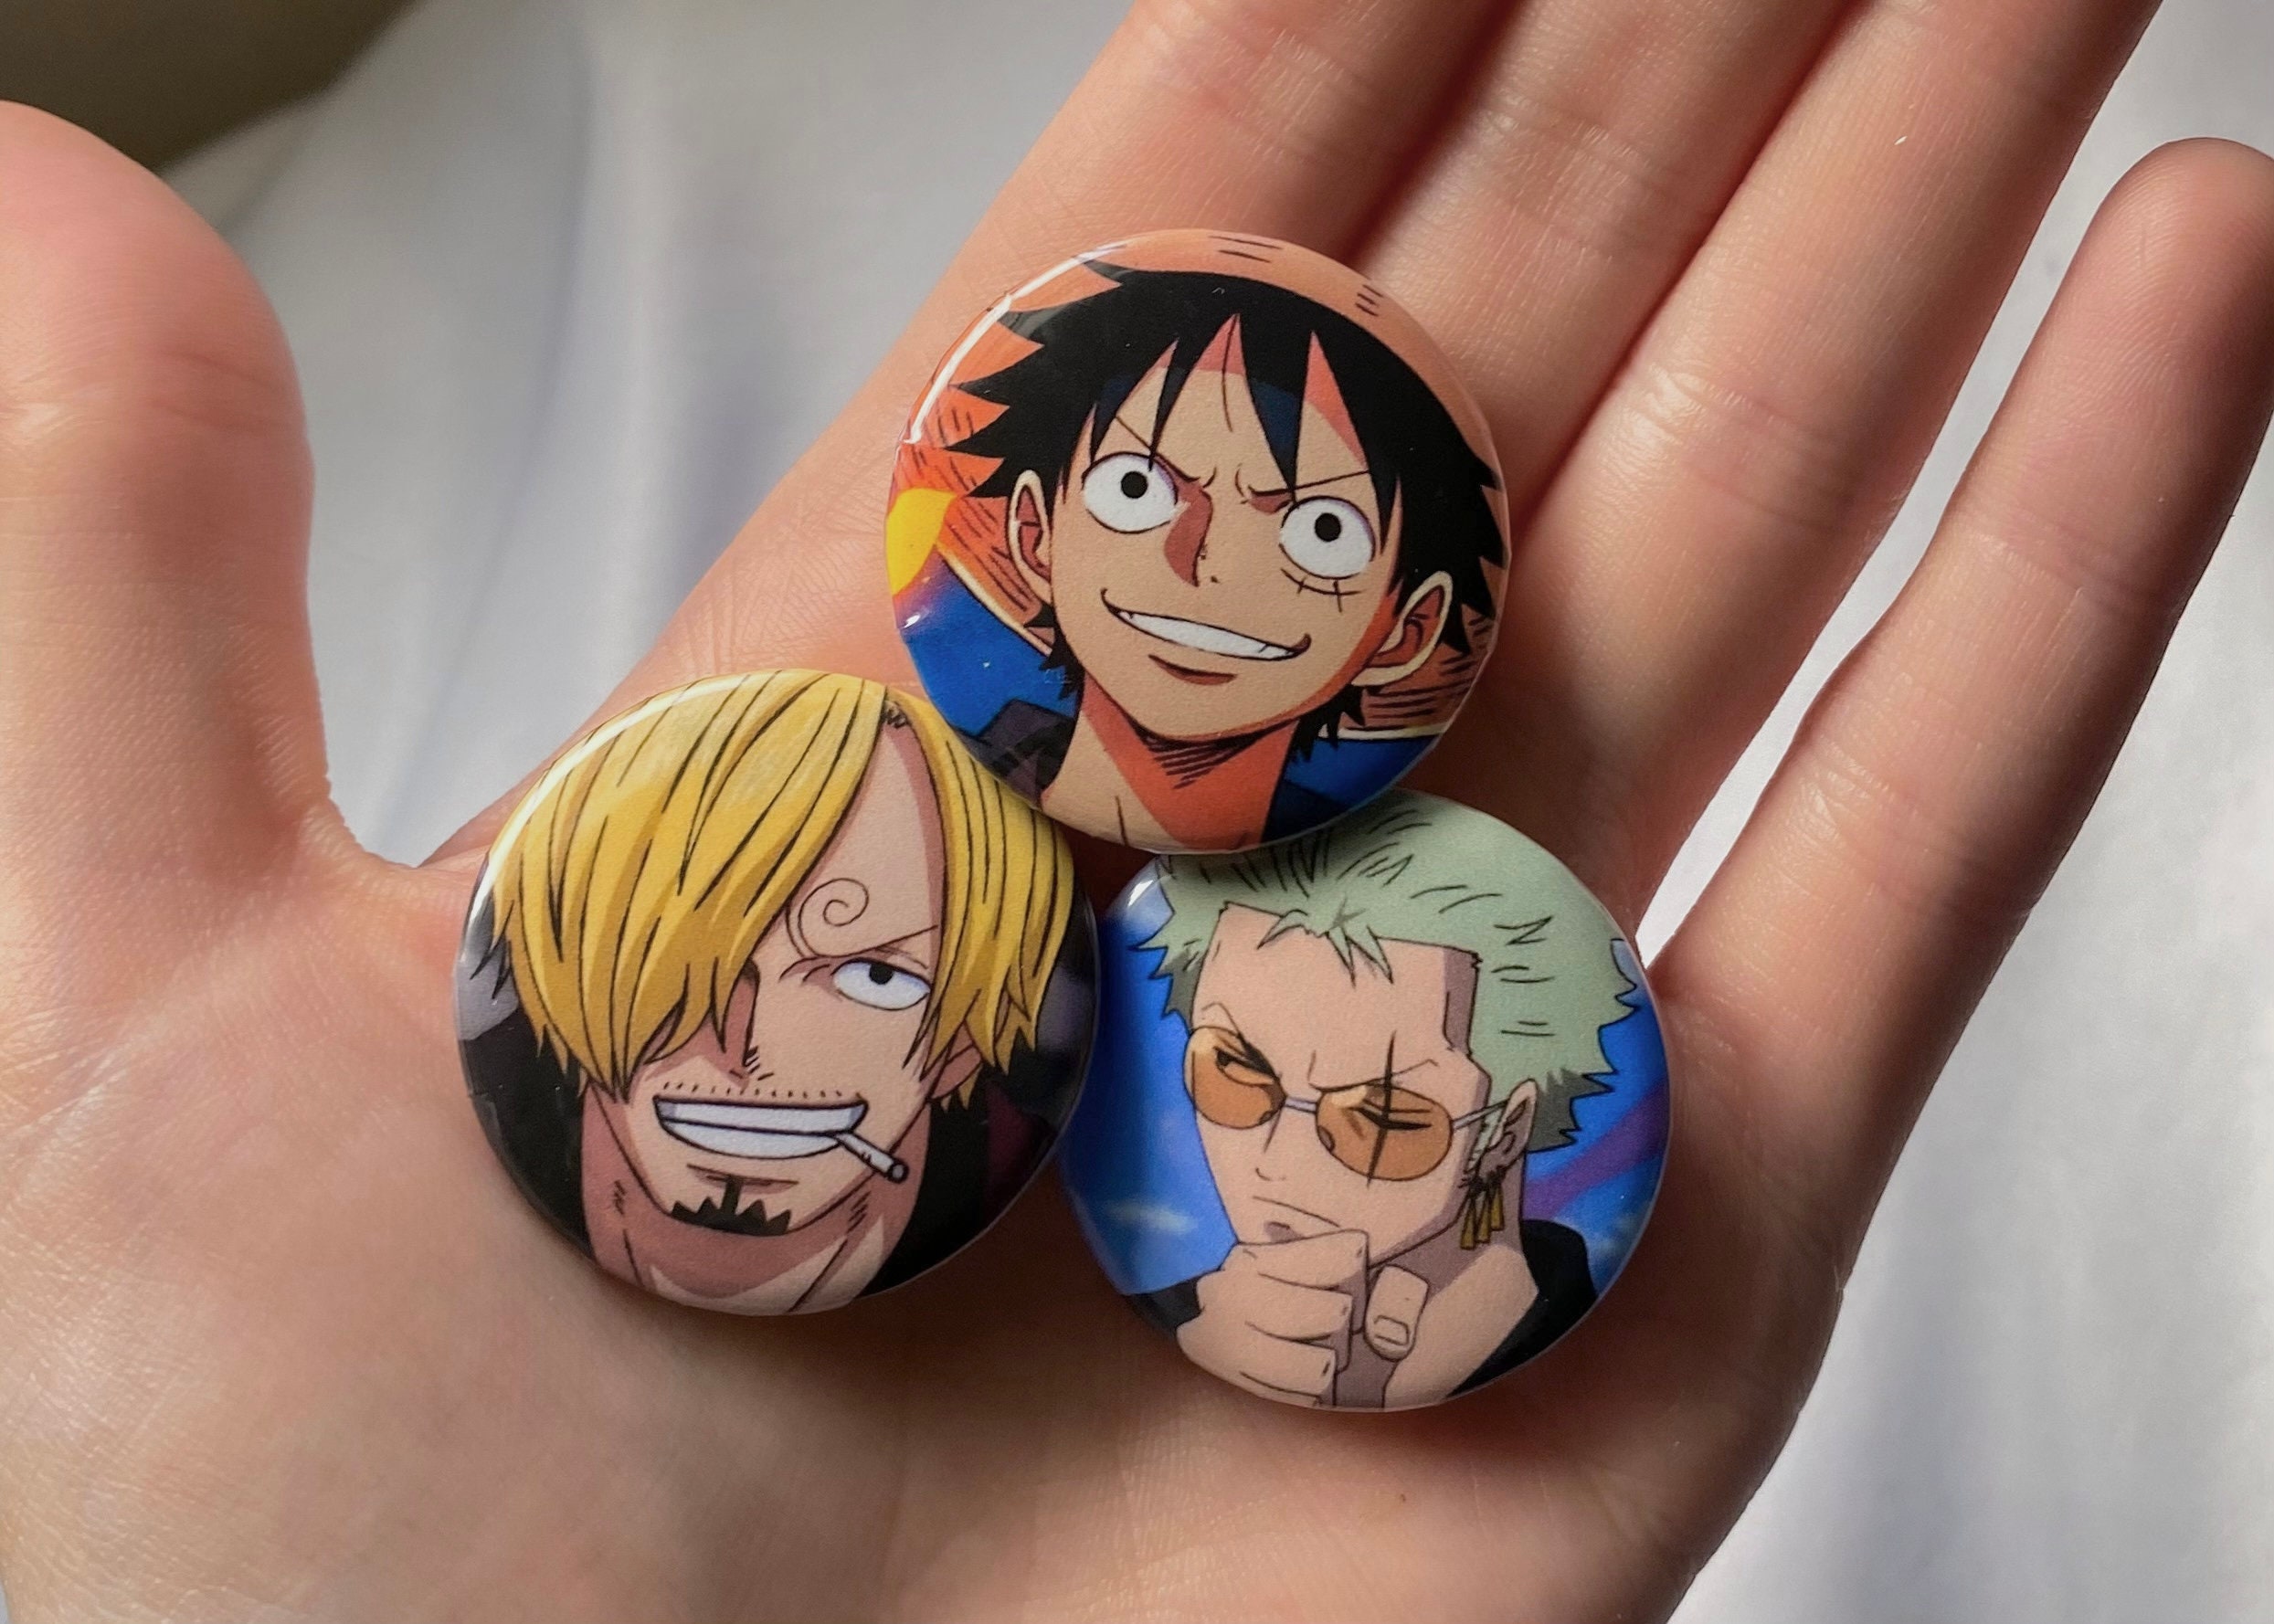 SOLOB Anime Pins Cute Pins Cartoon Pirates Pins for Backpacks, Birthday Christmas Children's Day Gift for Kids Friends Anime Fans,Pack Includes 5 Pcs